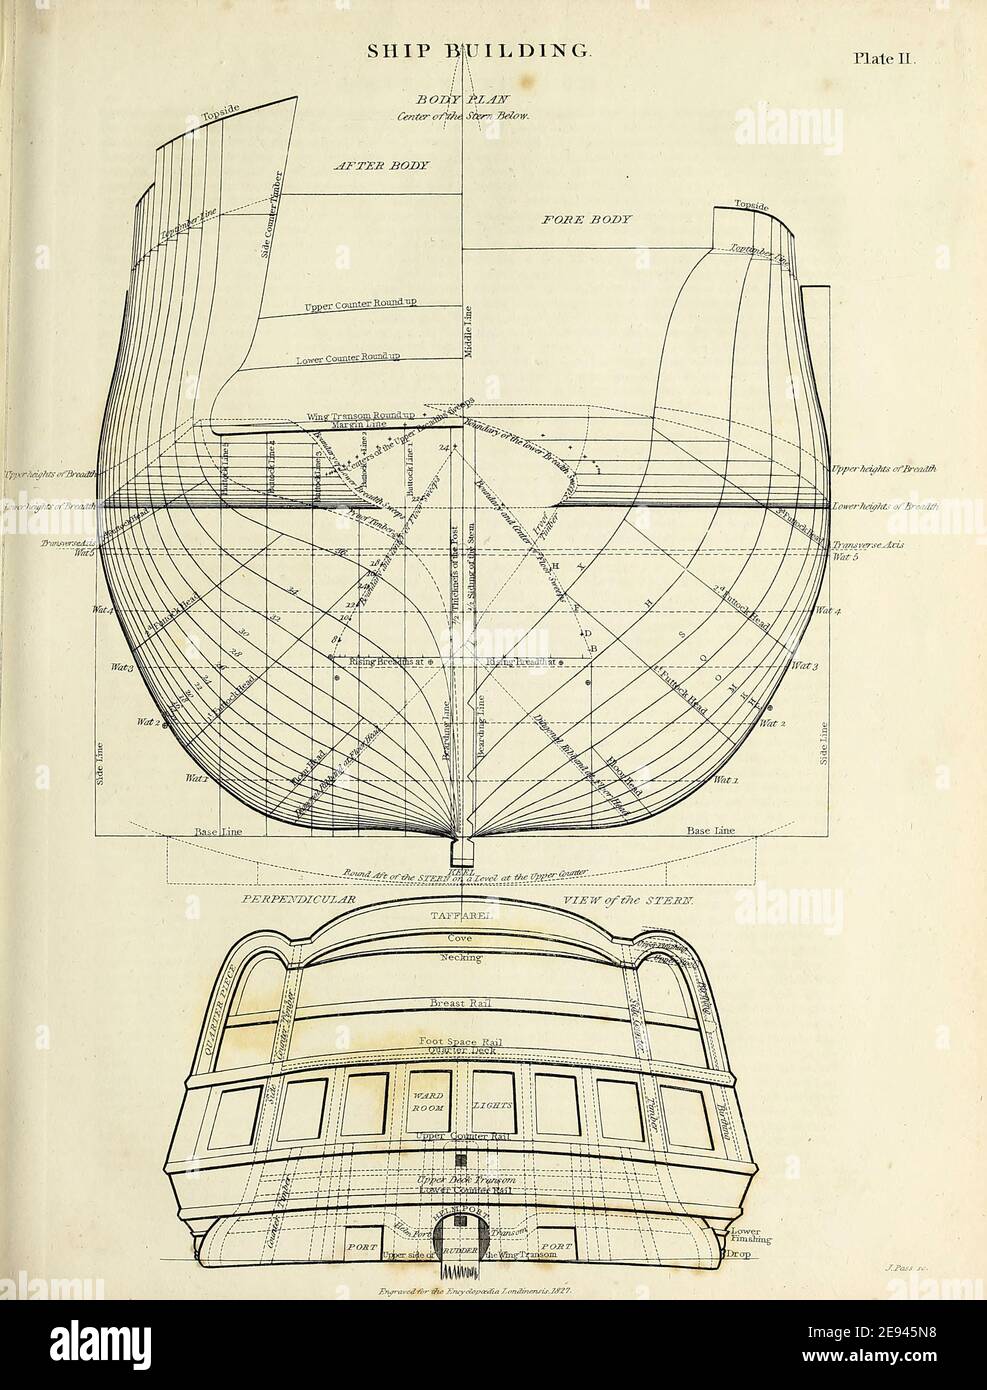 Ship design and building Copperplate engraving From the Encyclopaedia Londinensis or, Universal dictionary of arts, sciences, and literature; Volume XXIII;  Edited by Wilkes, John. Published in London in 1828 Stock Photo